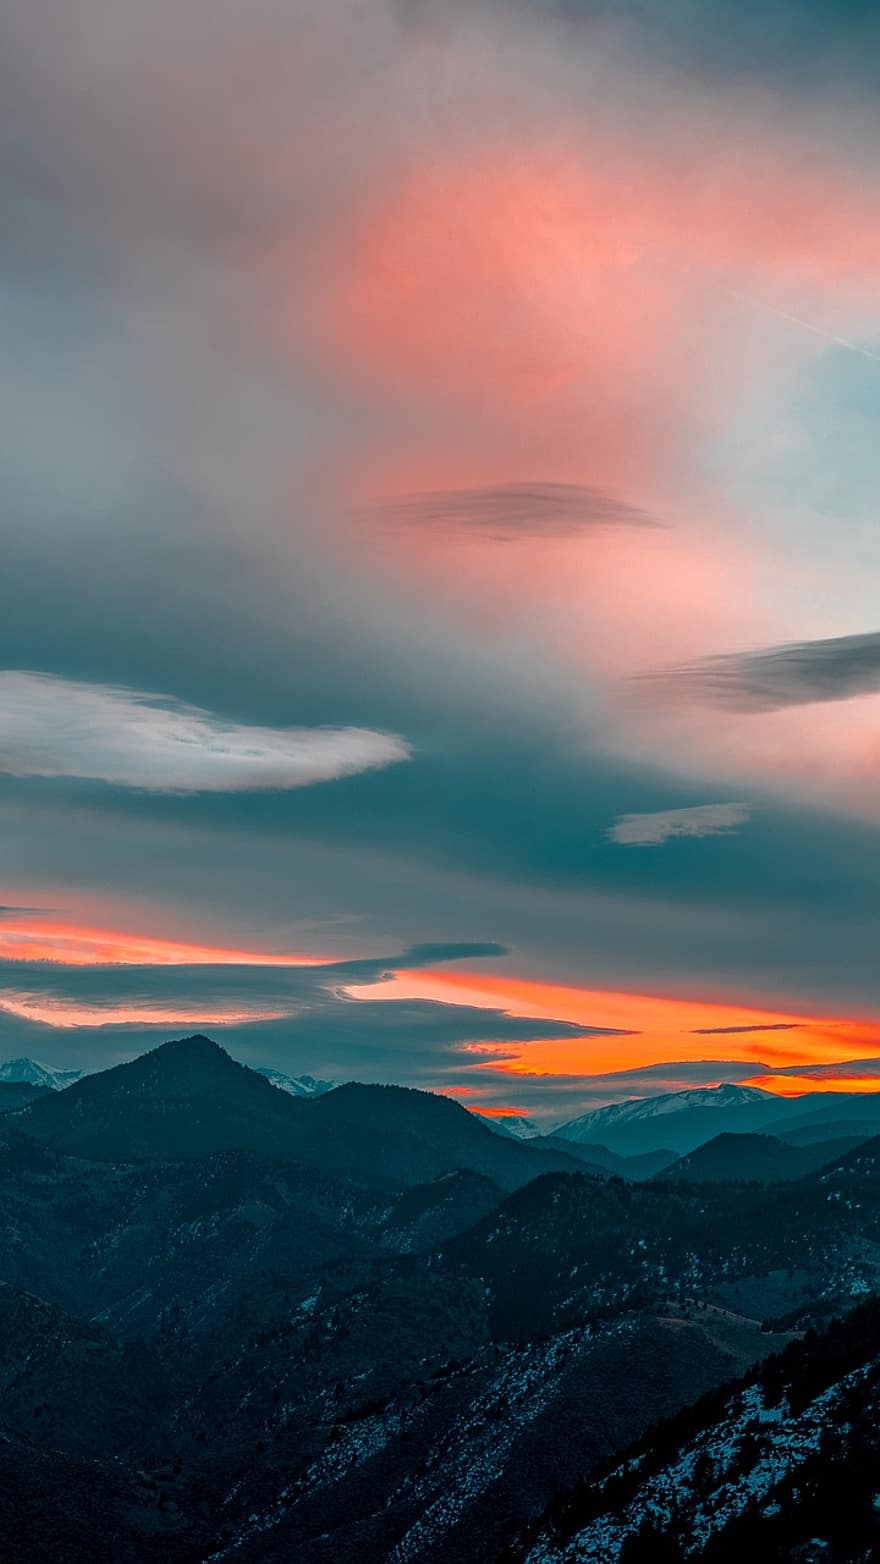 Mountains, Sunset, Nature, Landscape, Mountain, Sky, Clouds, Scenic, Layers, Fall Sunset, Evening